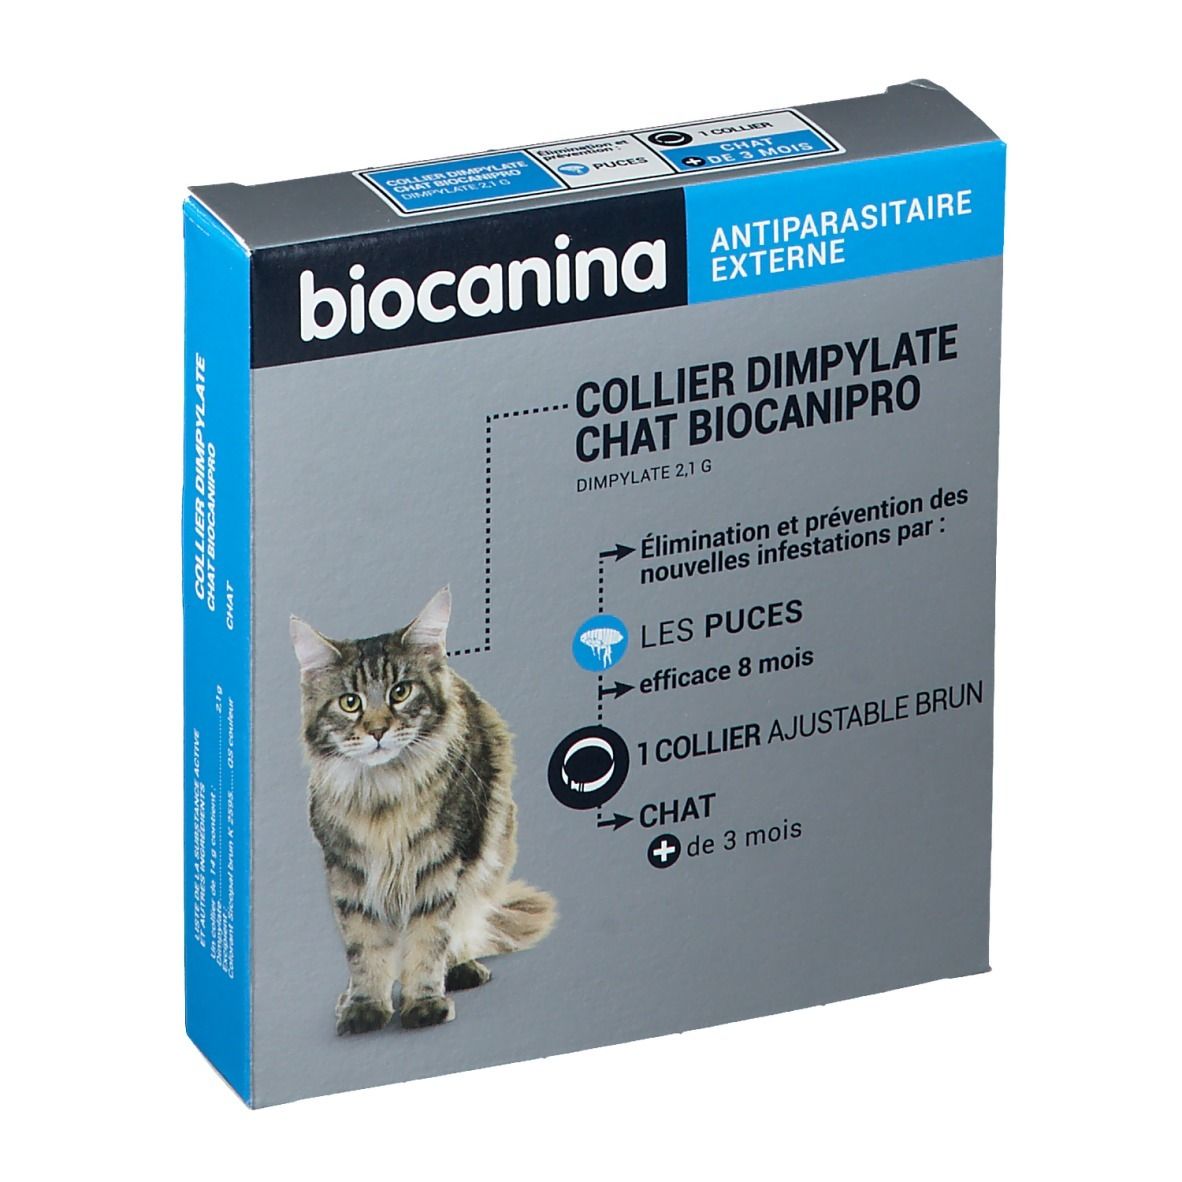 Biocanina Collier insecticide Biocanipro pour chat